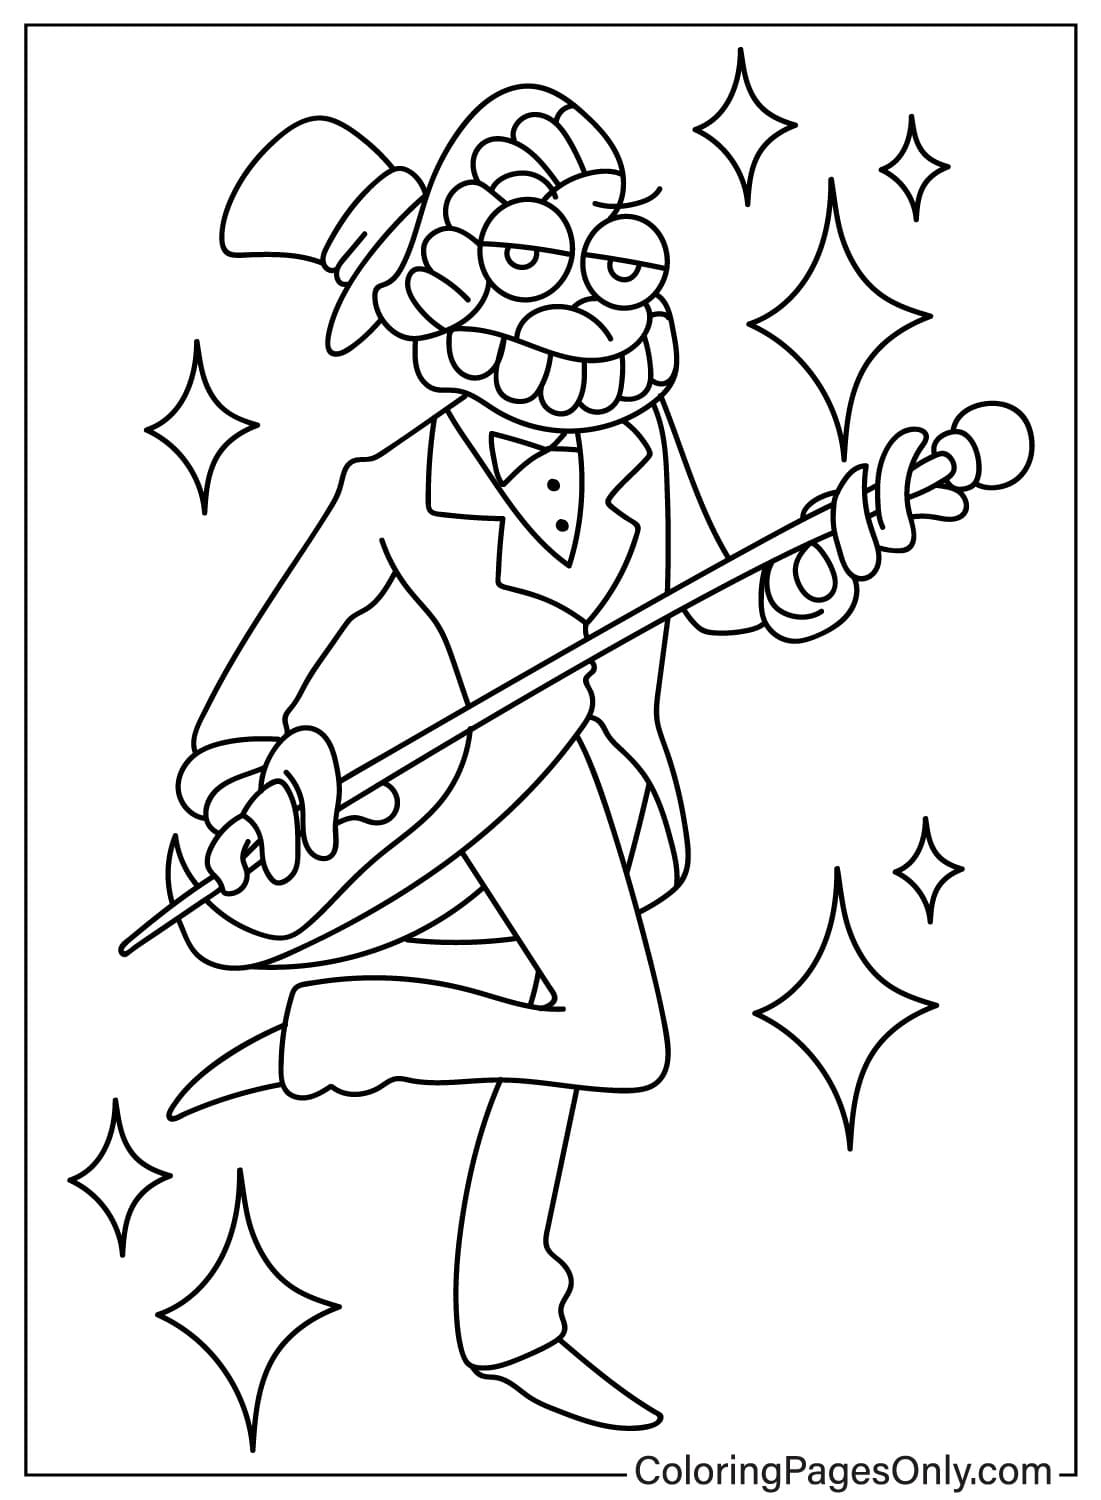 Caine Coloring Sheet for Kids from Caine